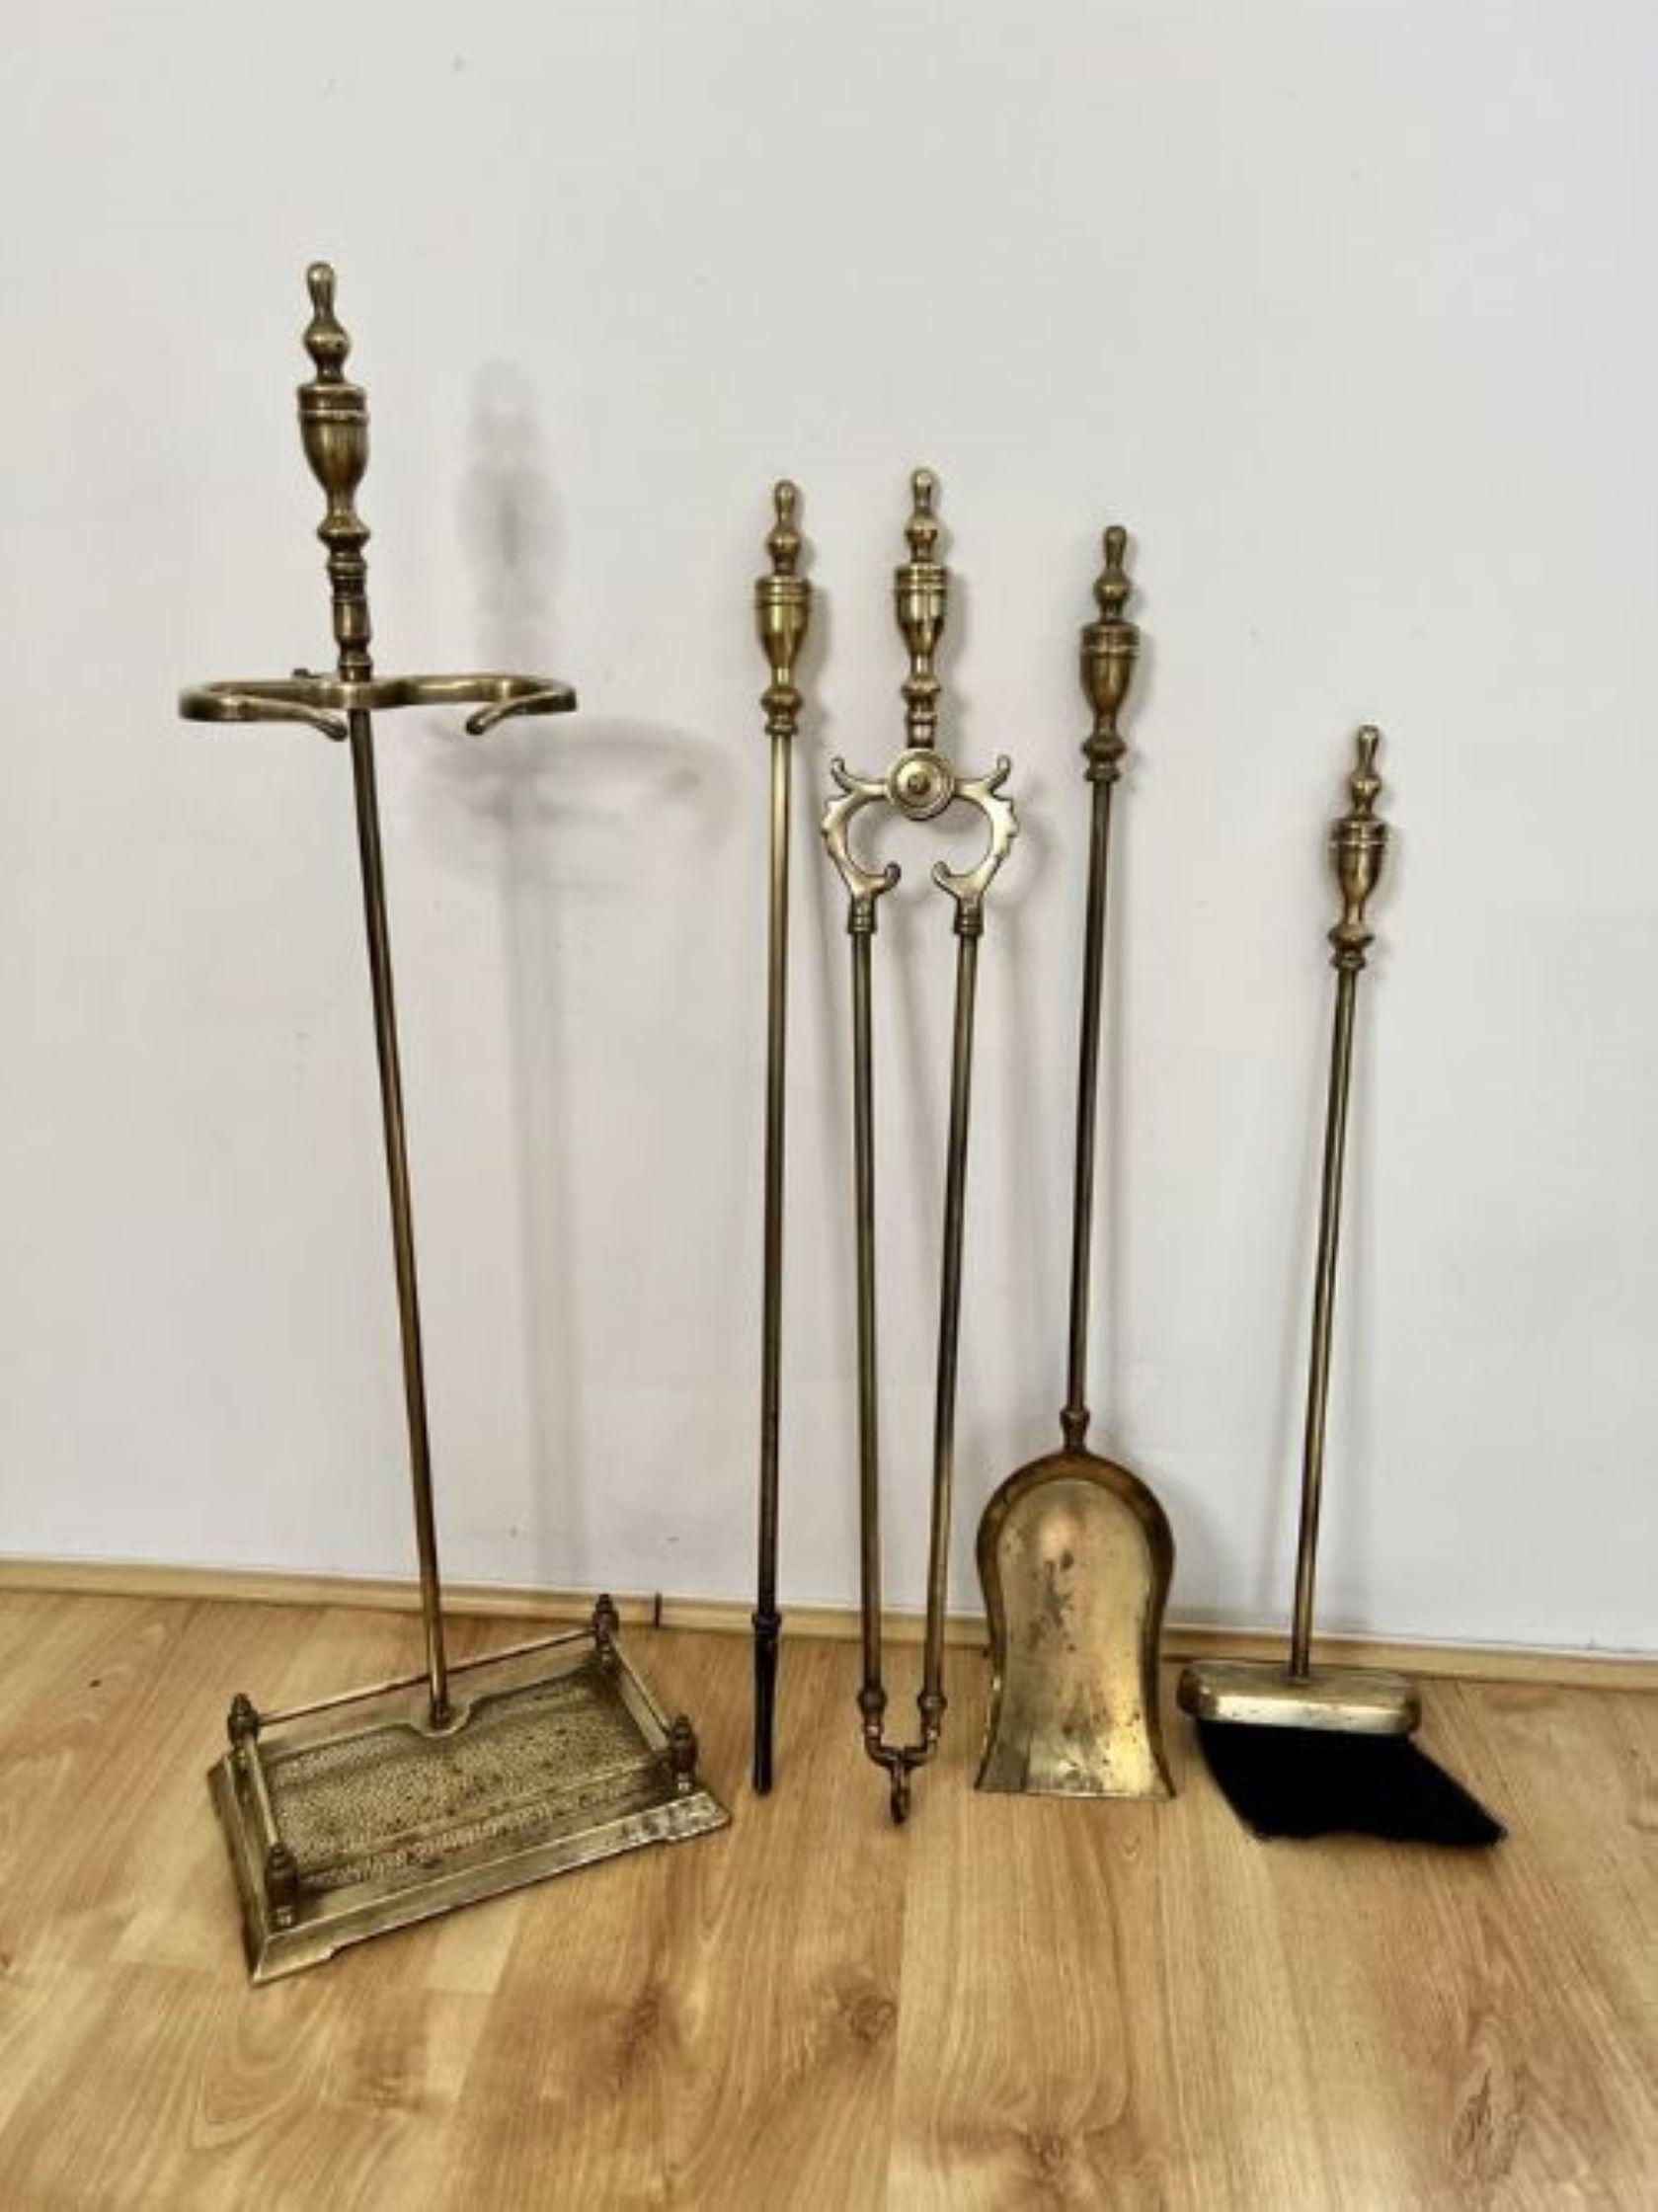 Quality antique Edwardian brass companion set and stand having a quality antique Edwardian brass stand with a pair of brass fire tongs, a brass shovel, a brass brush and a brass poker with shaped brass handles.